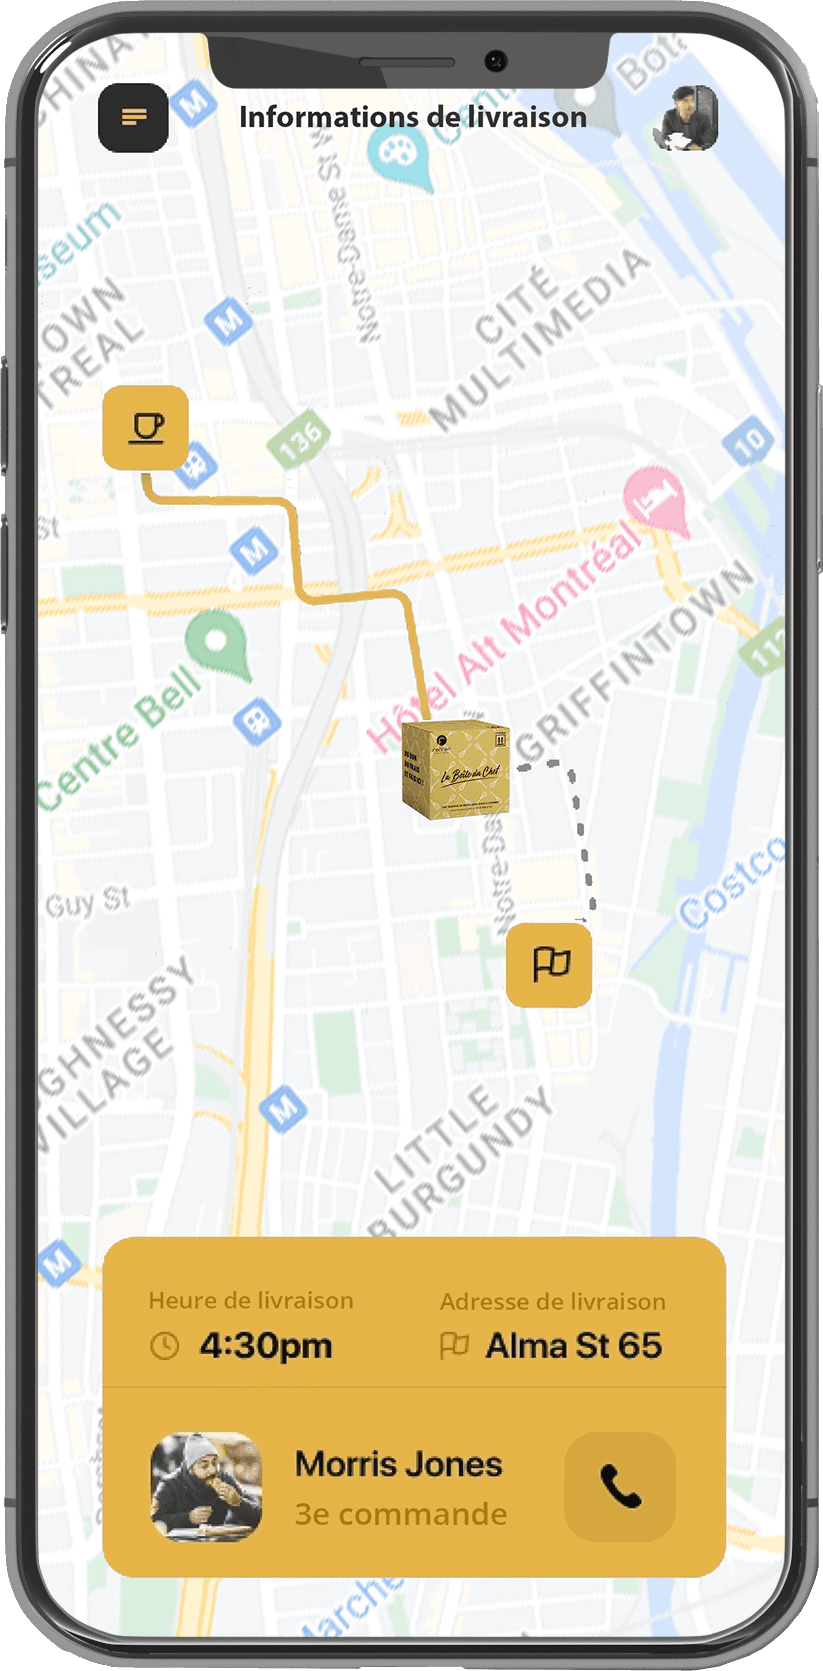 Delivery routes are optimized in real time with the use of AI and the integration of Open Street Map, Google Maps and Waze.